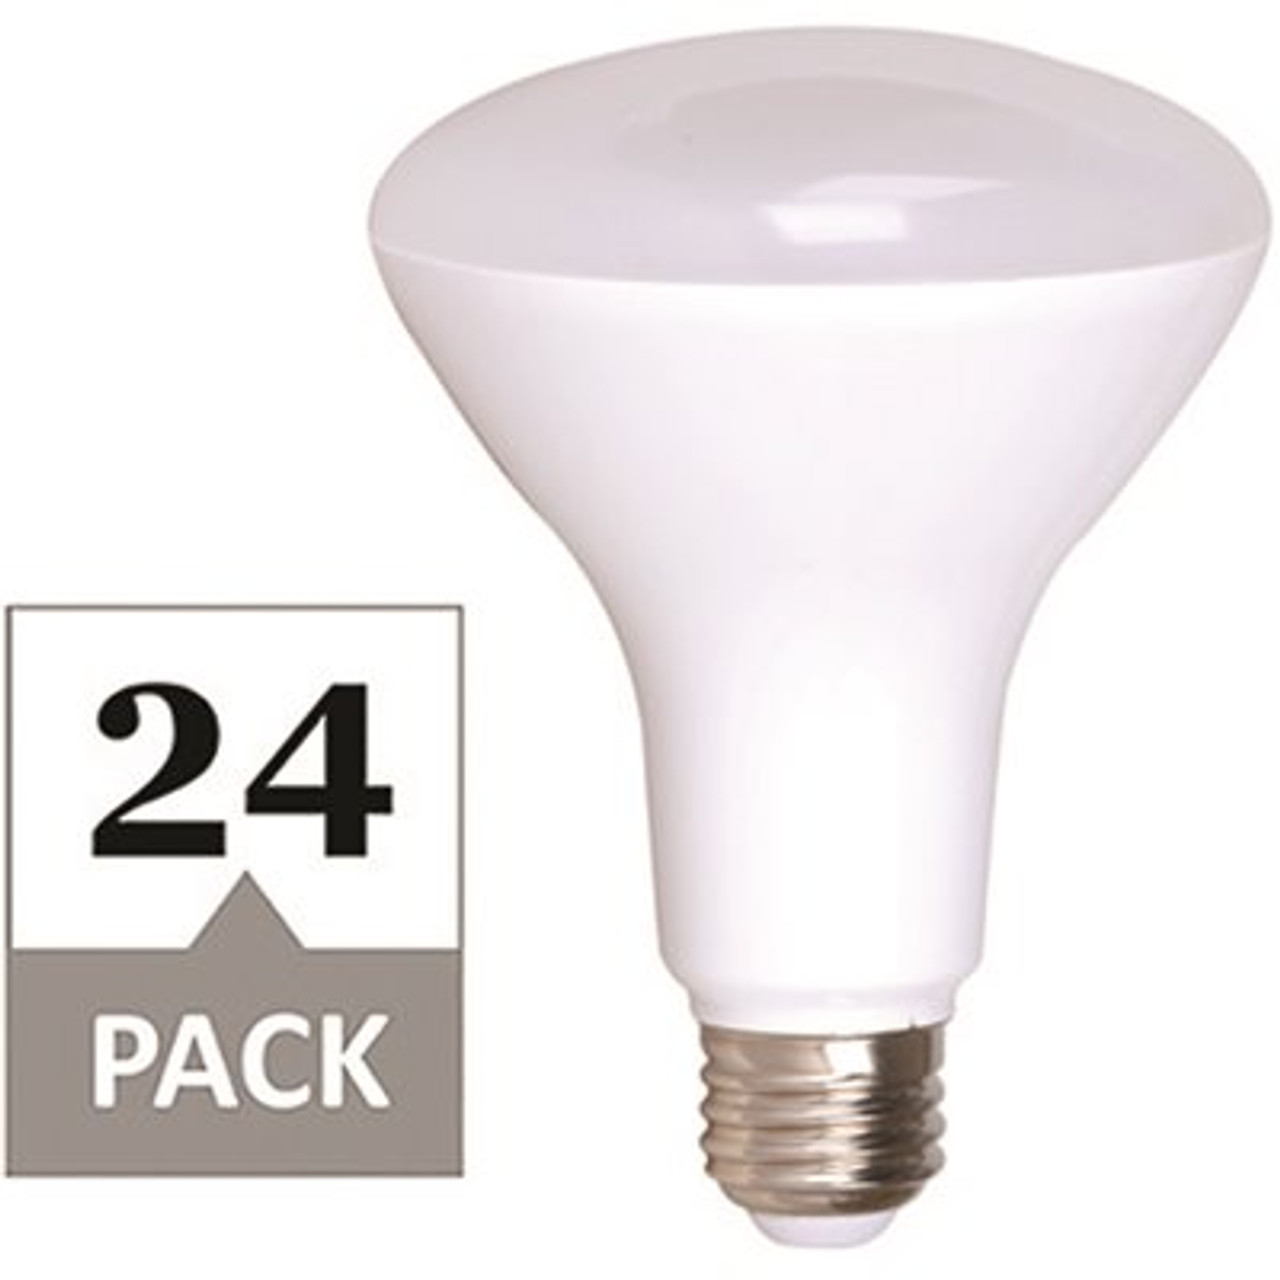 Simply Conserve 65-Watt Equivalent BR30 Dimmable LED Light Bulb Bright White 5000K (24-Pack)